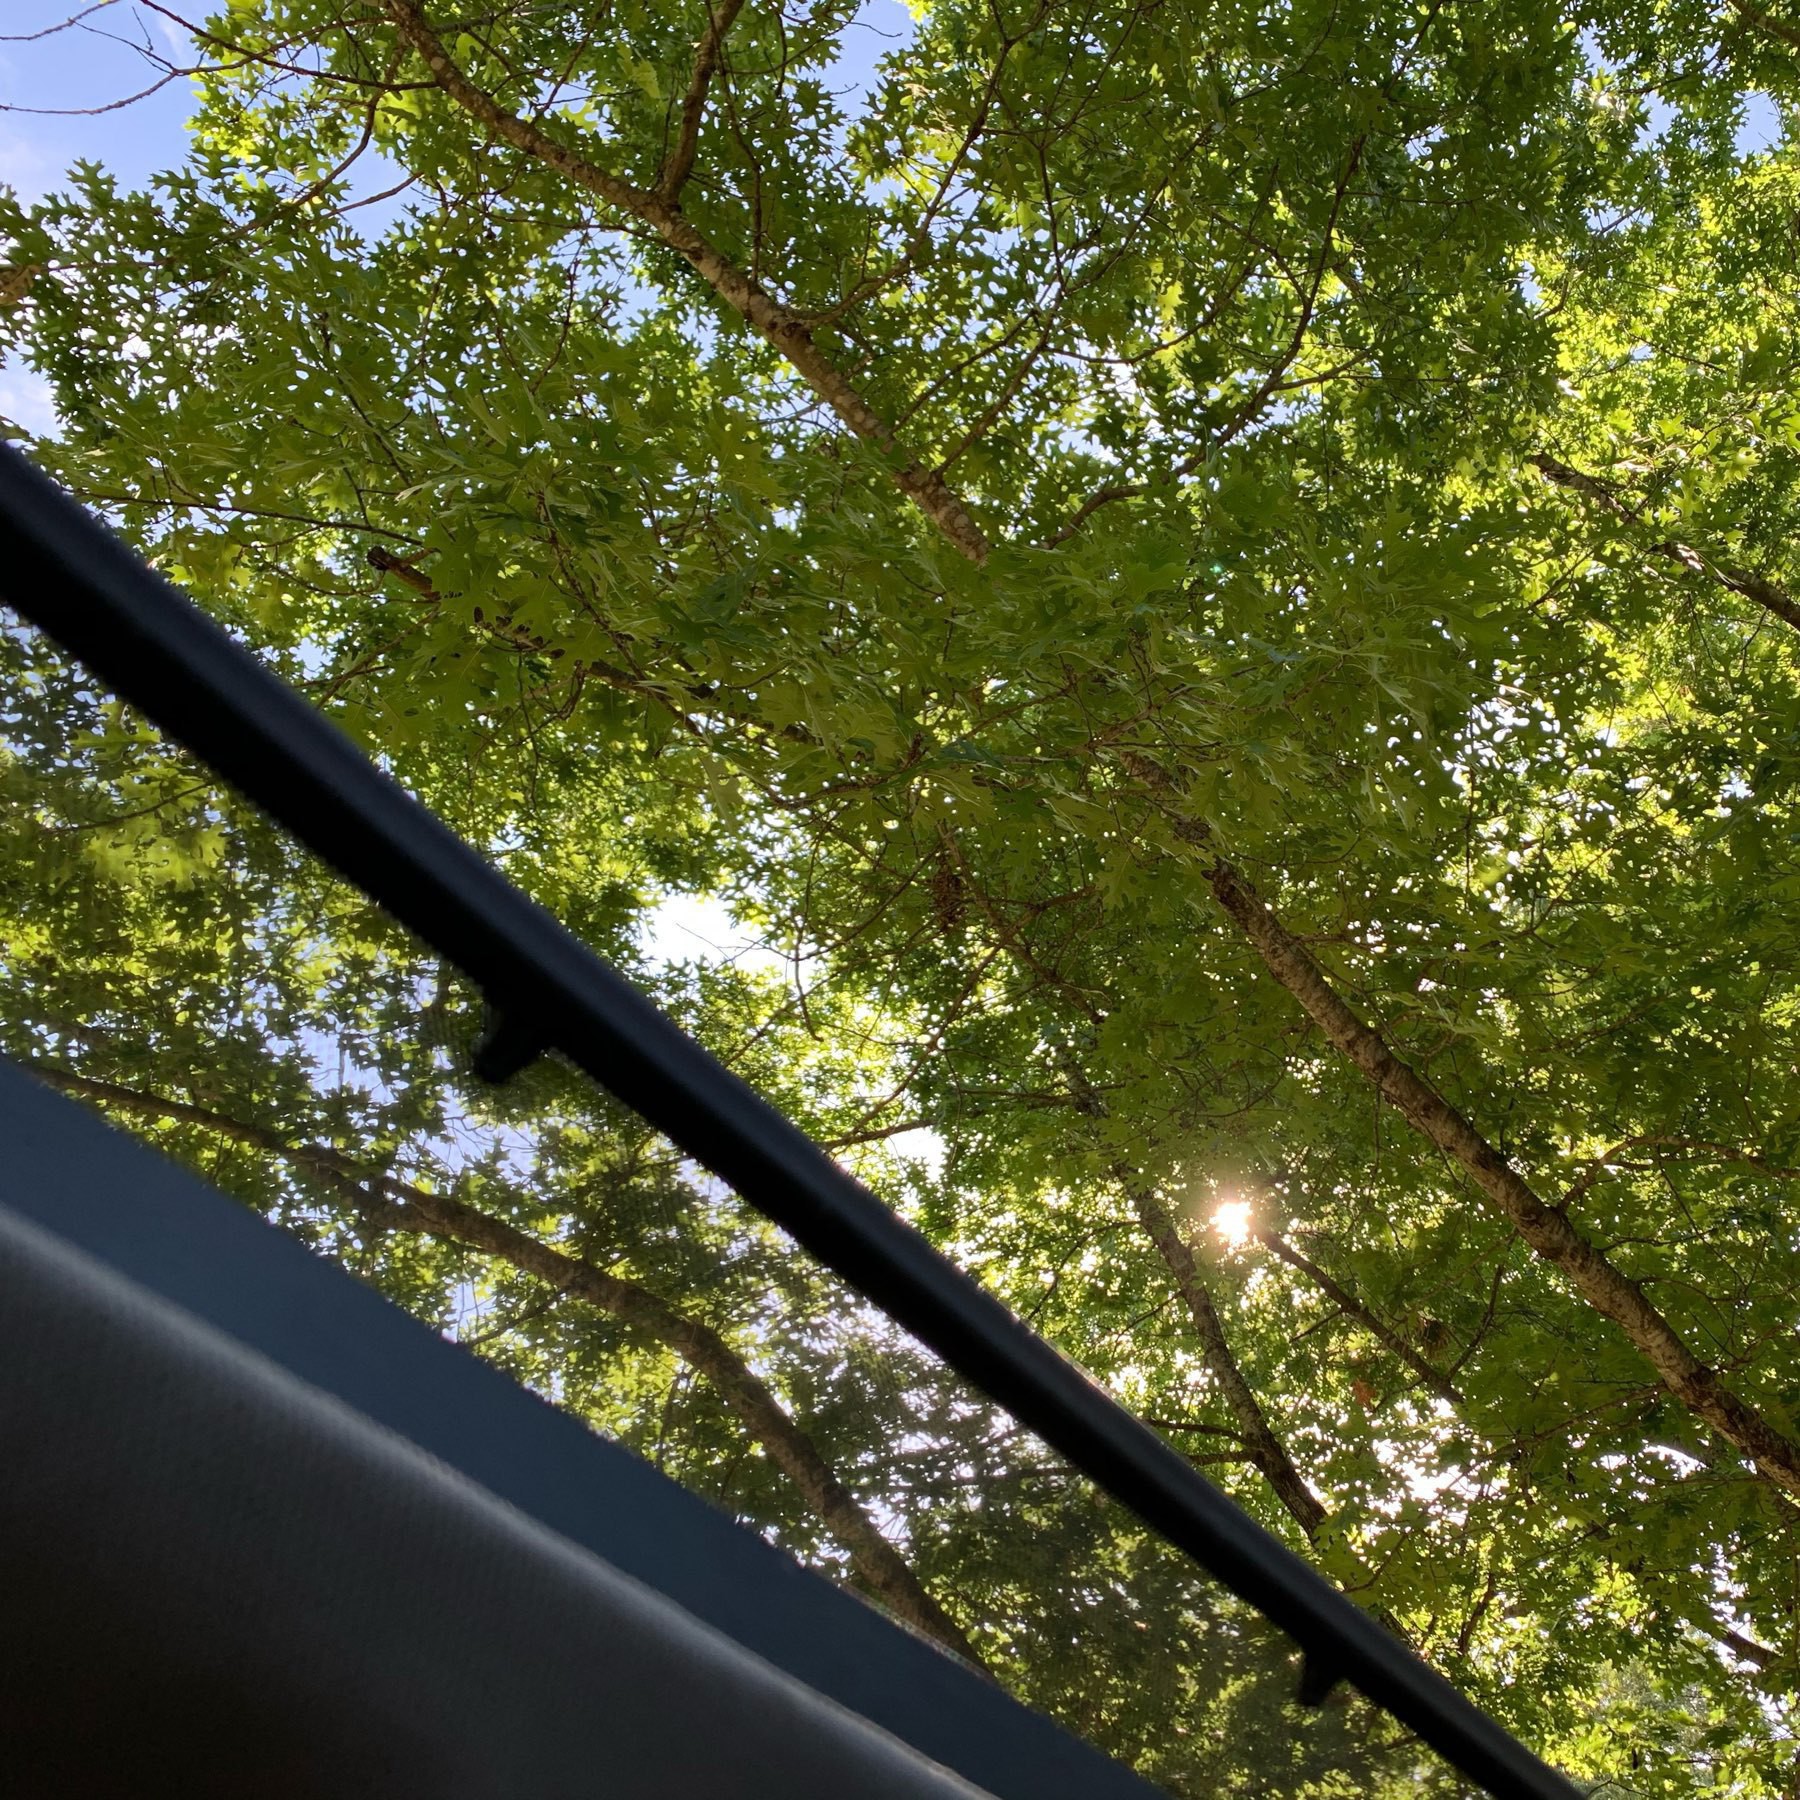 View out sunroof, looking under the trees